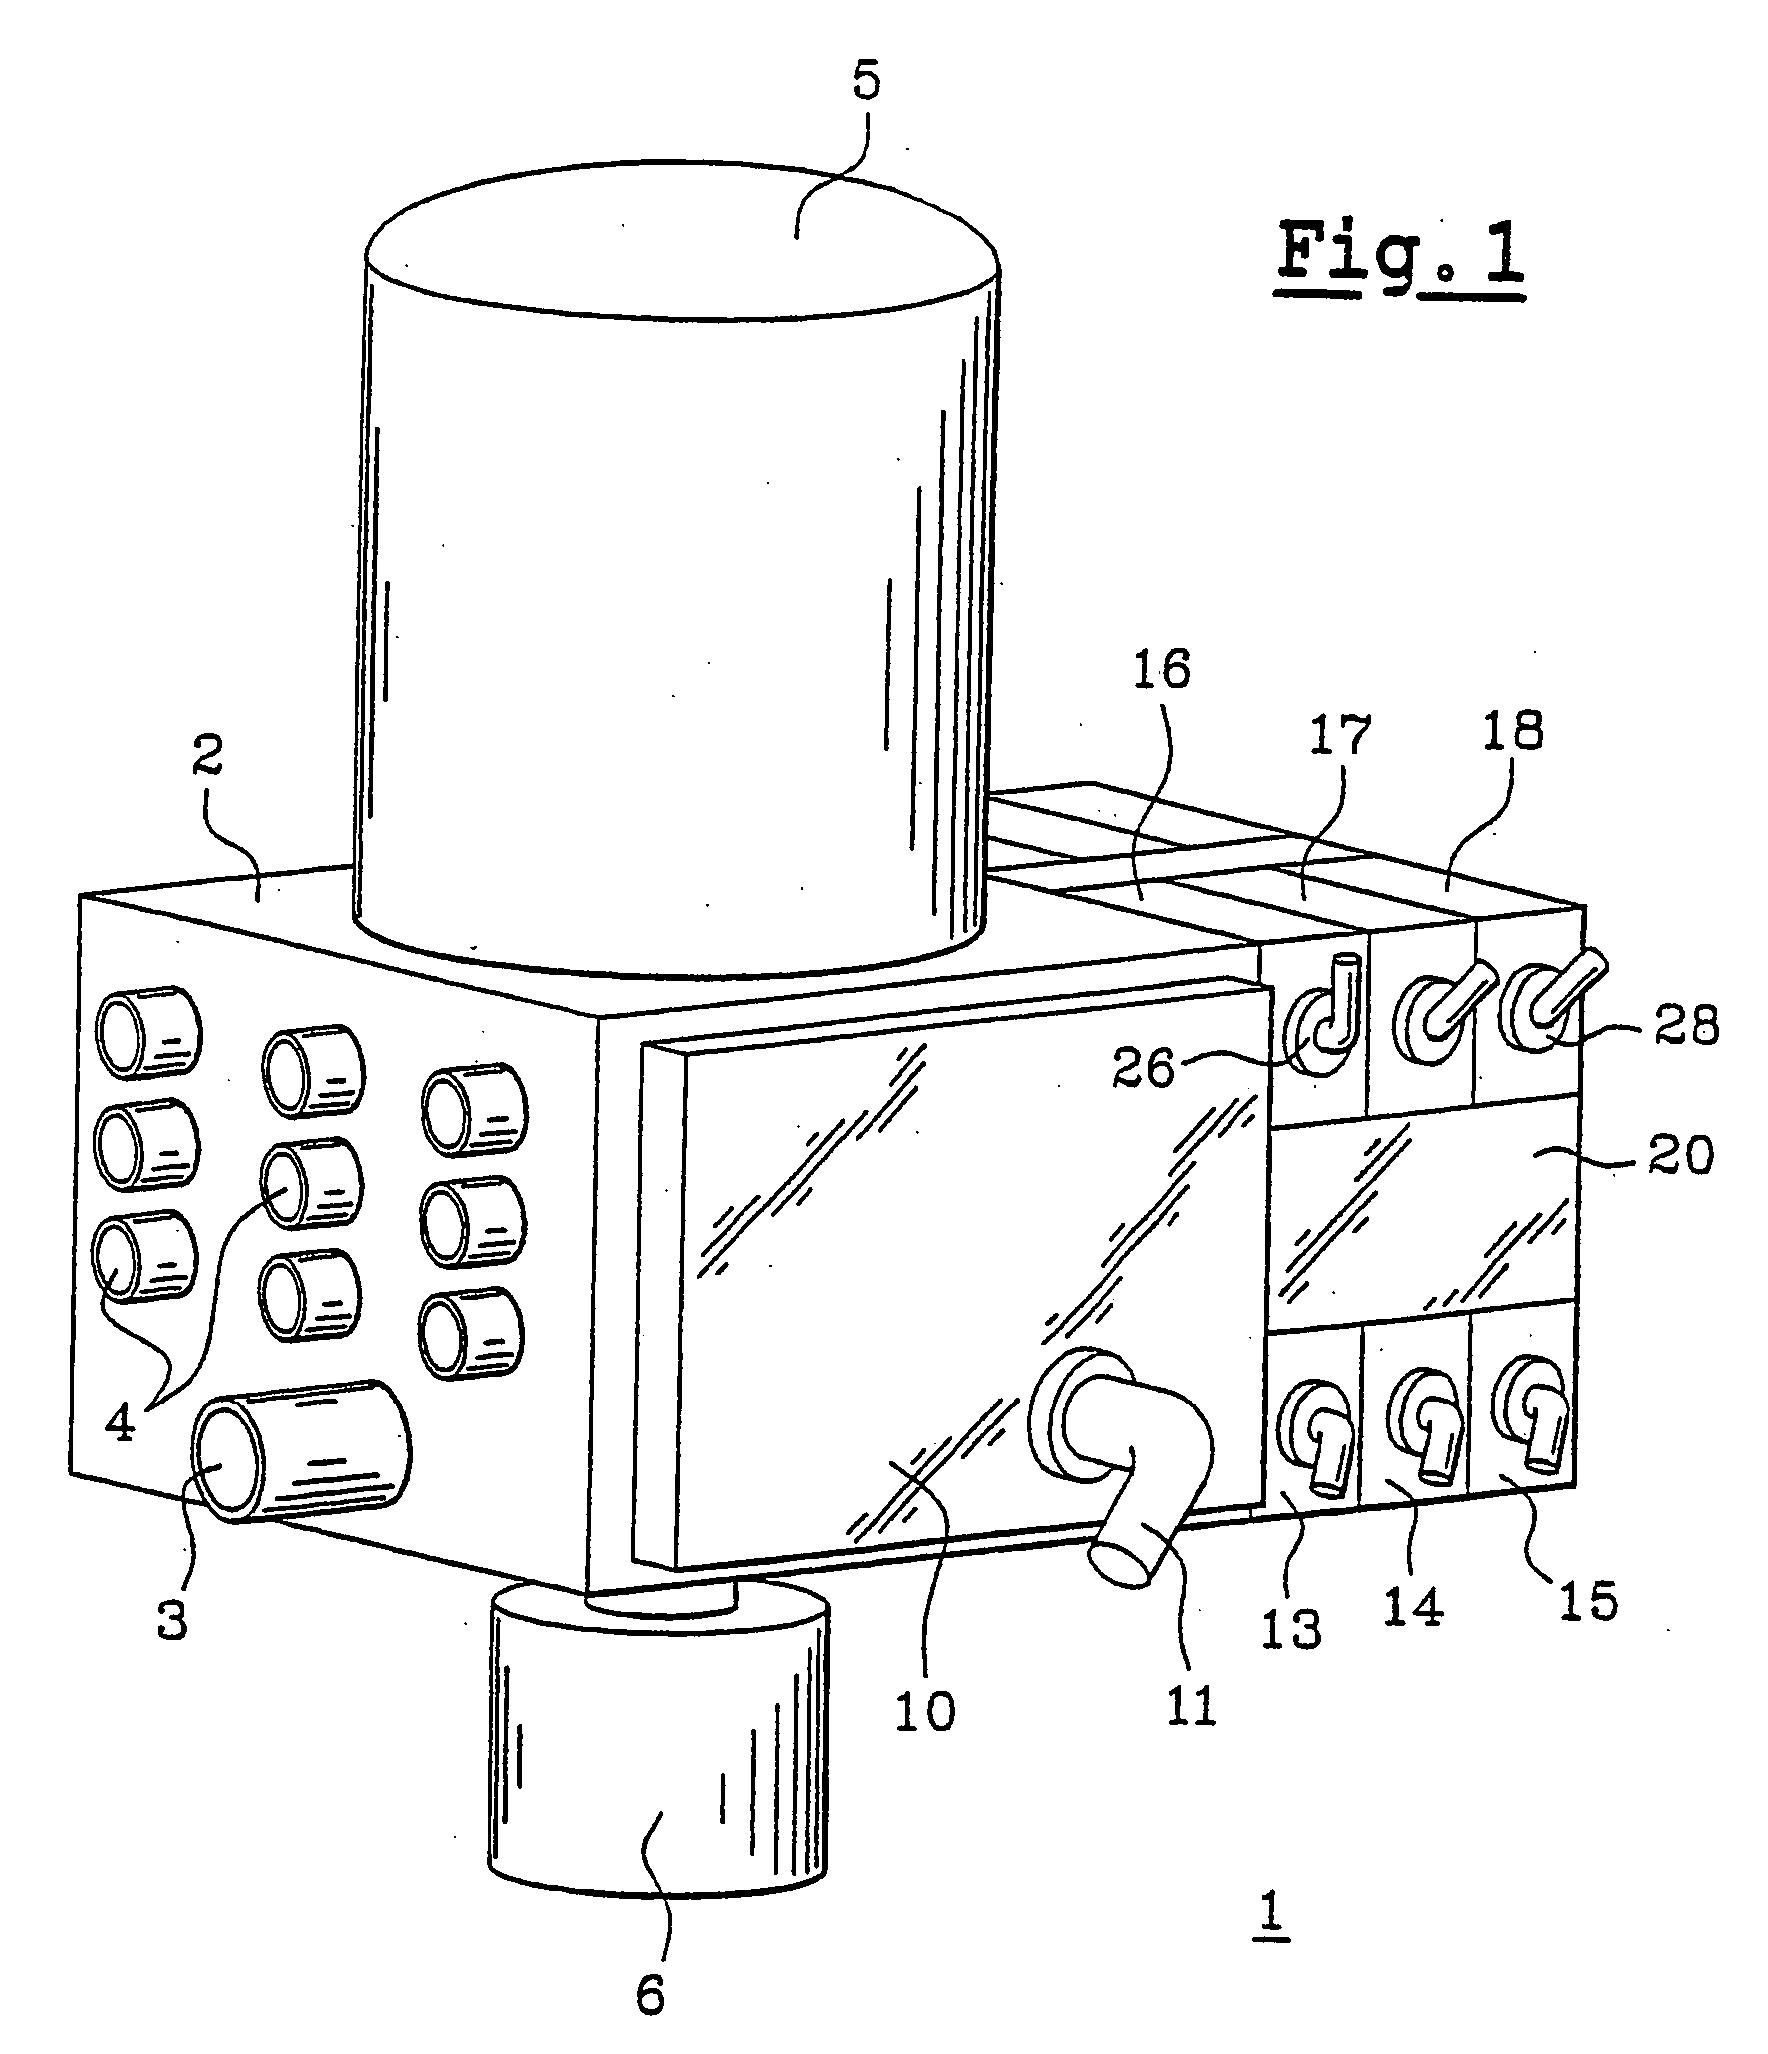 Compressed air treatment device that is designed to be installed in an industrial vehicle